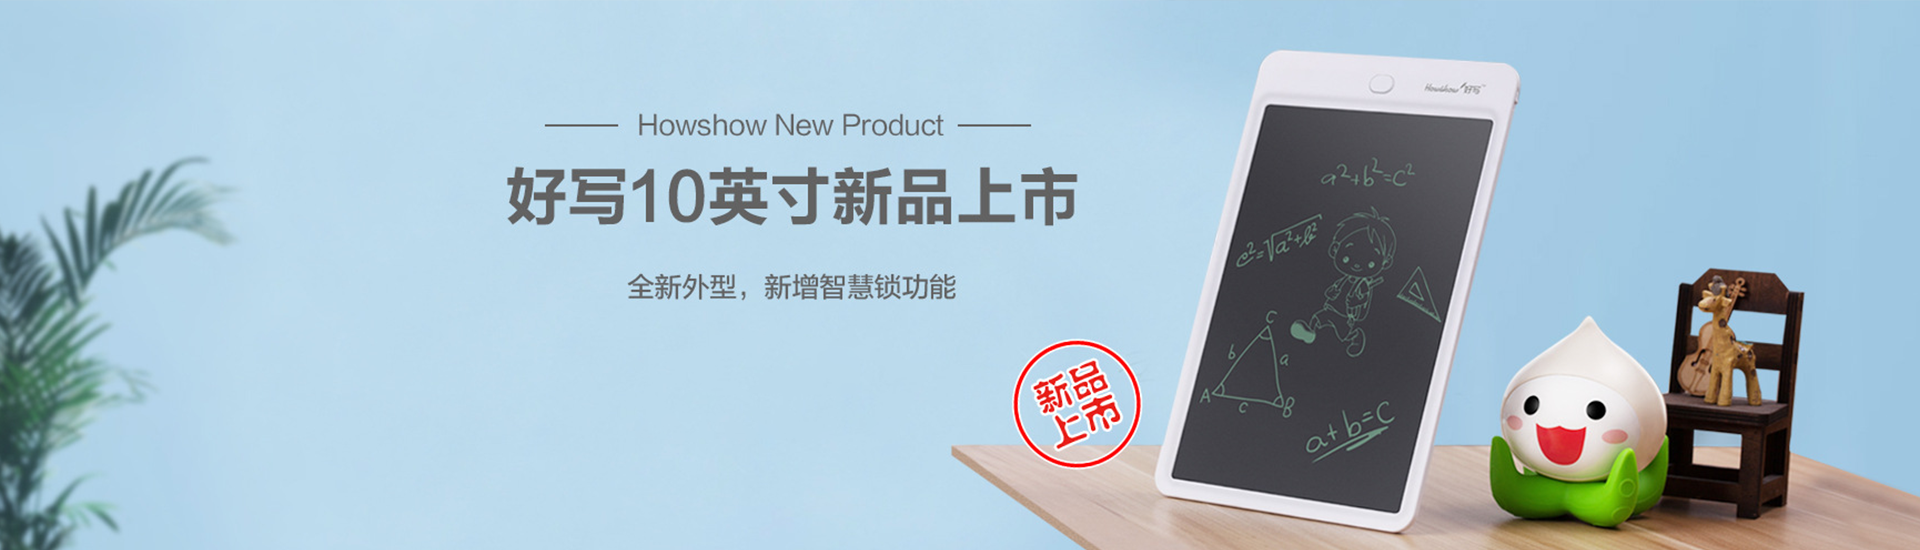 Howshow New Product,Howshow 10英寸新品上市，全新外型，新增智慧锁功能